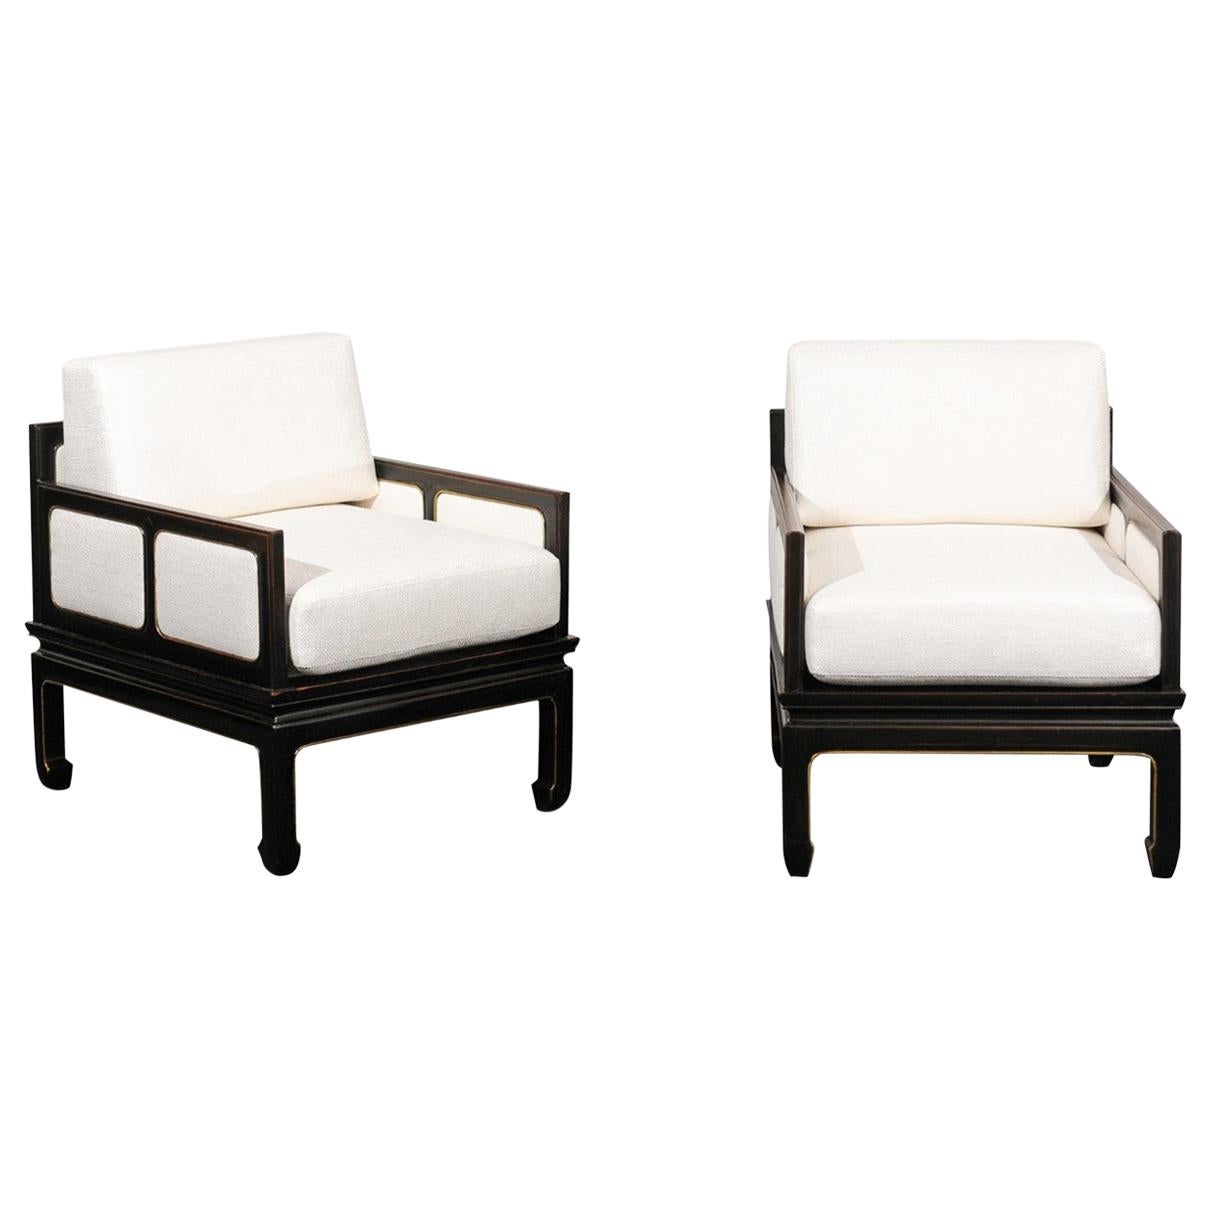 Sophisticated Restored Pair of Lounge Chairs by Baker Furniture, circa 1960